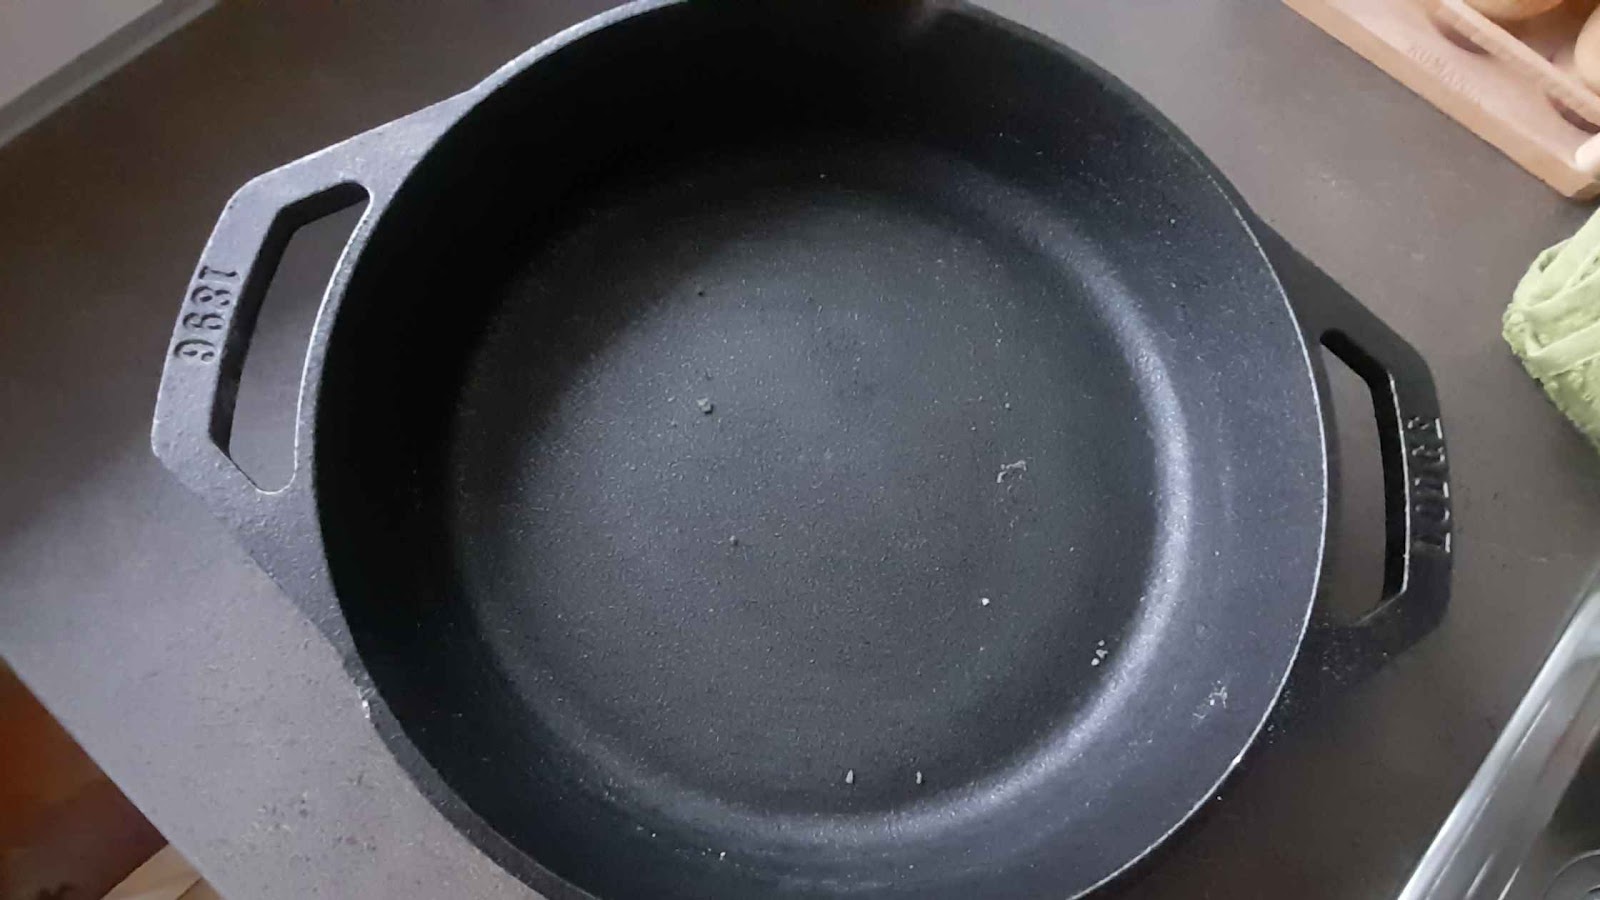 Skillet after scrubbing with steel sponge and baking soda.